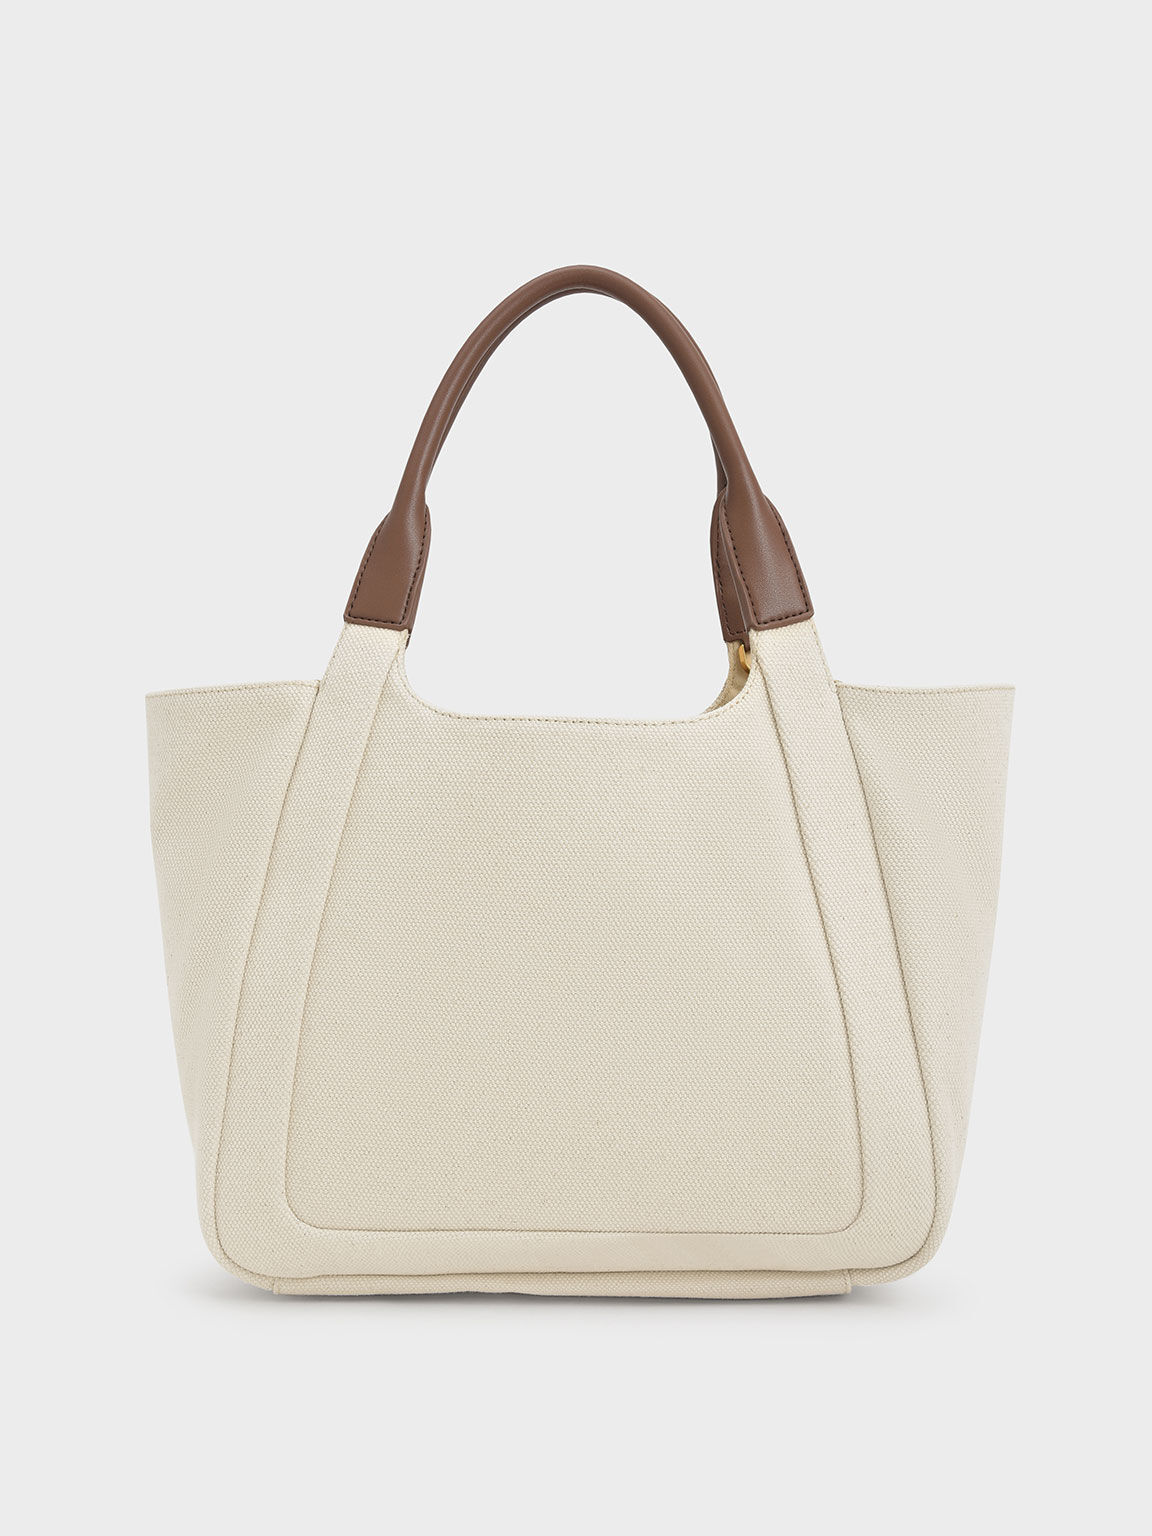 Women's Tote Bags, Large, Canvas & Leather Tote Bags